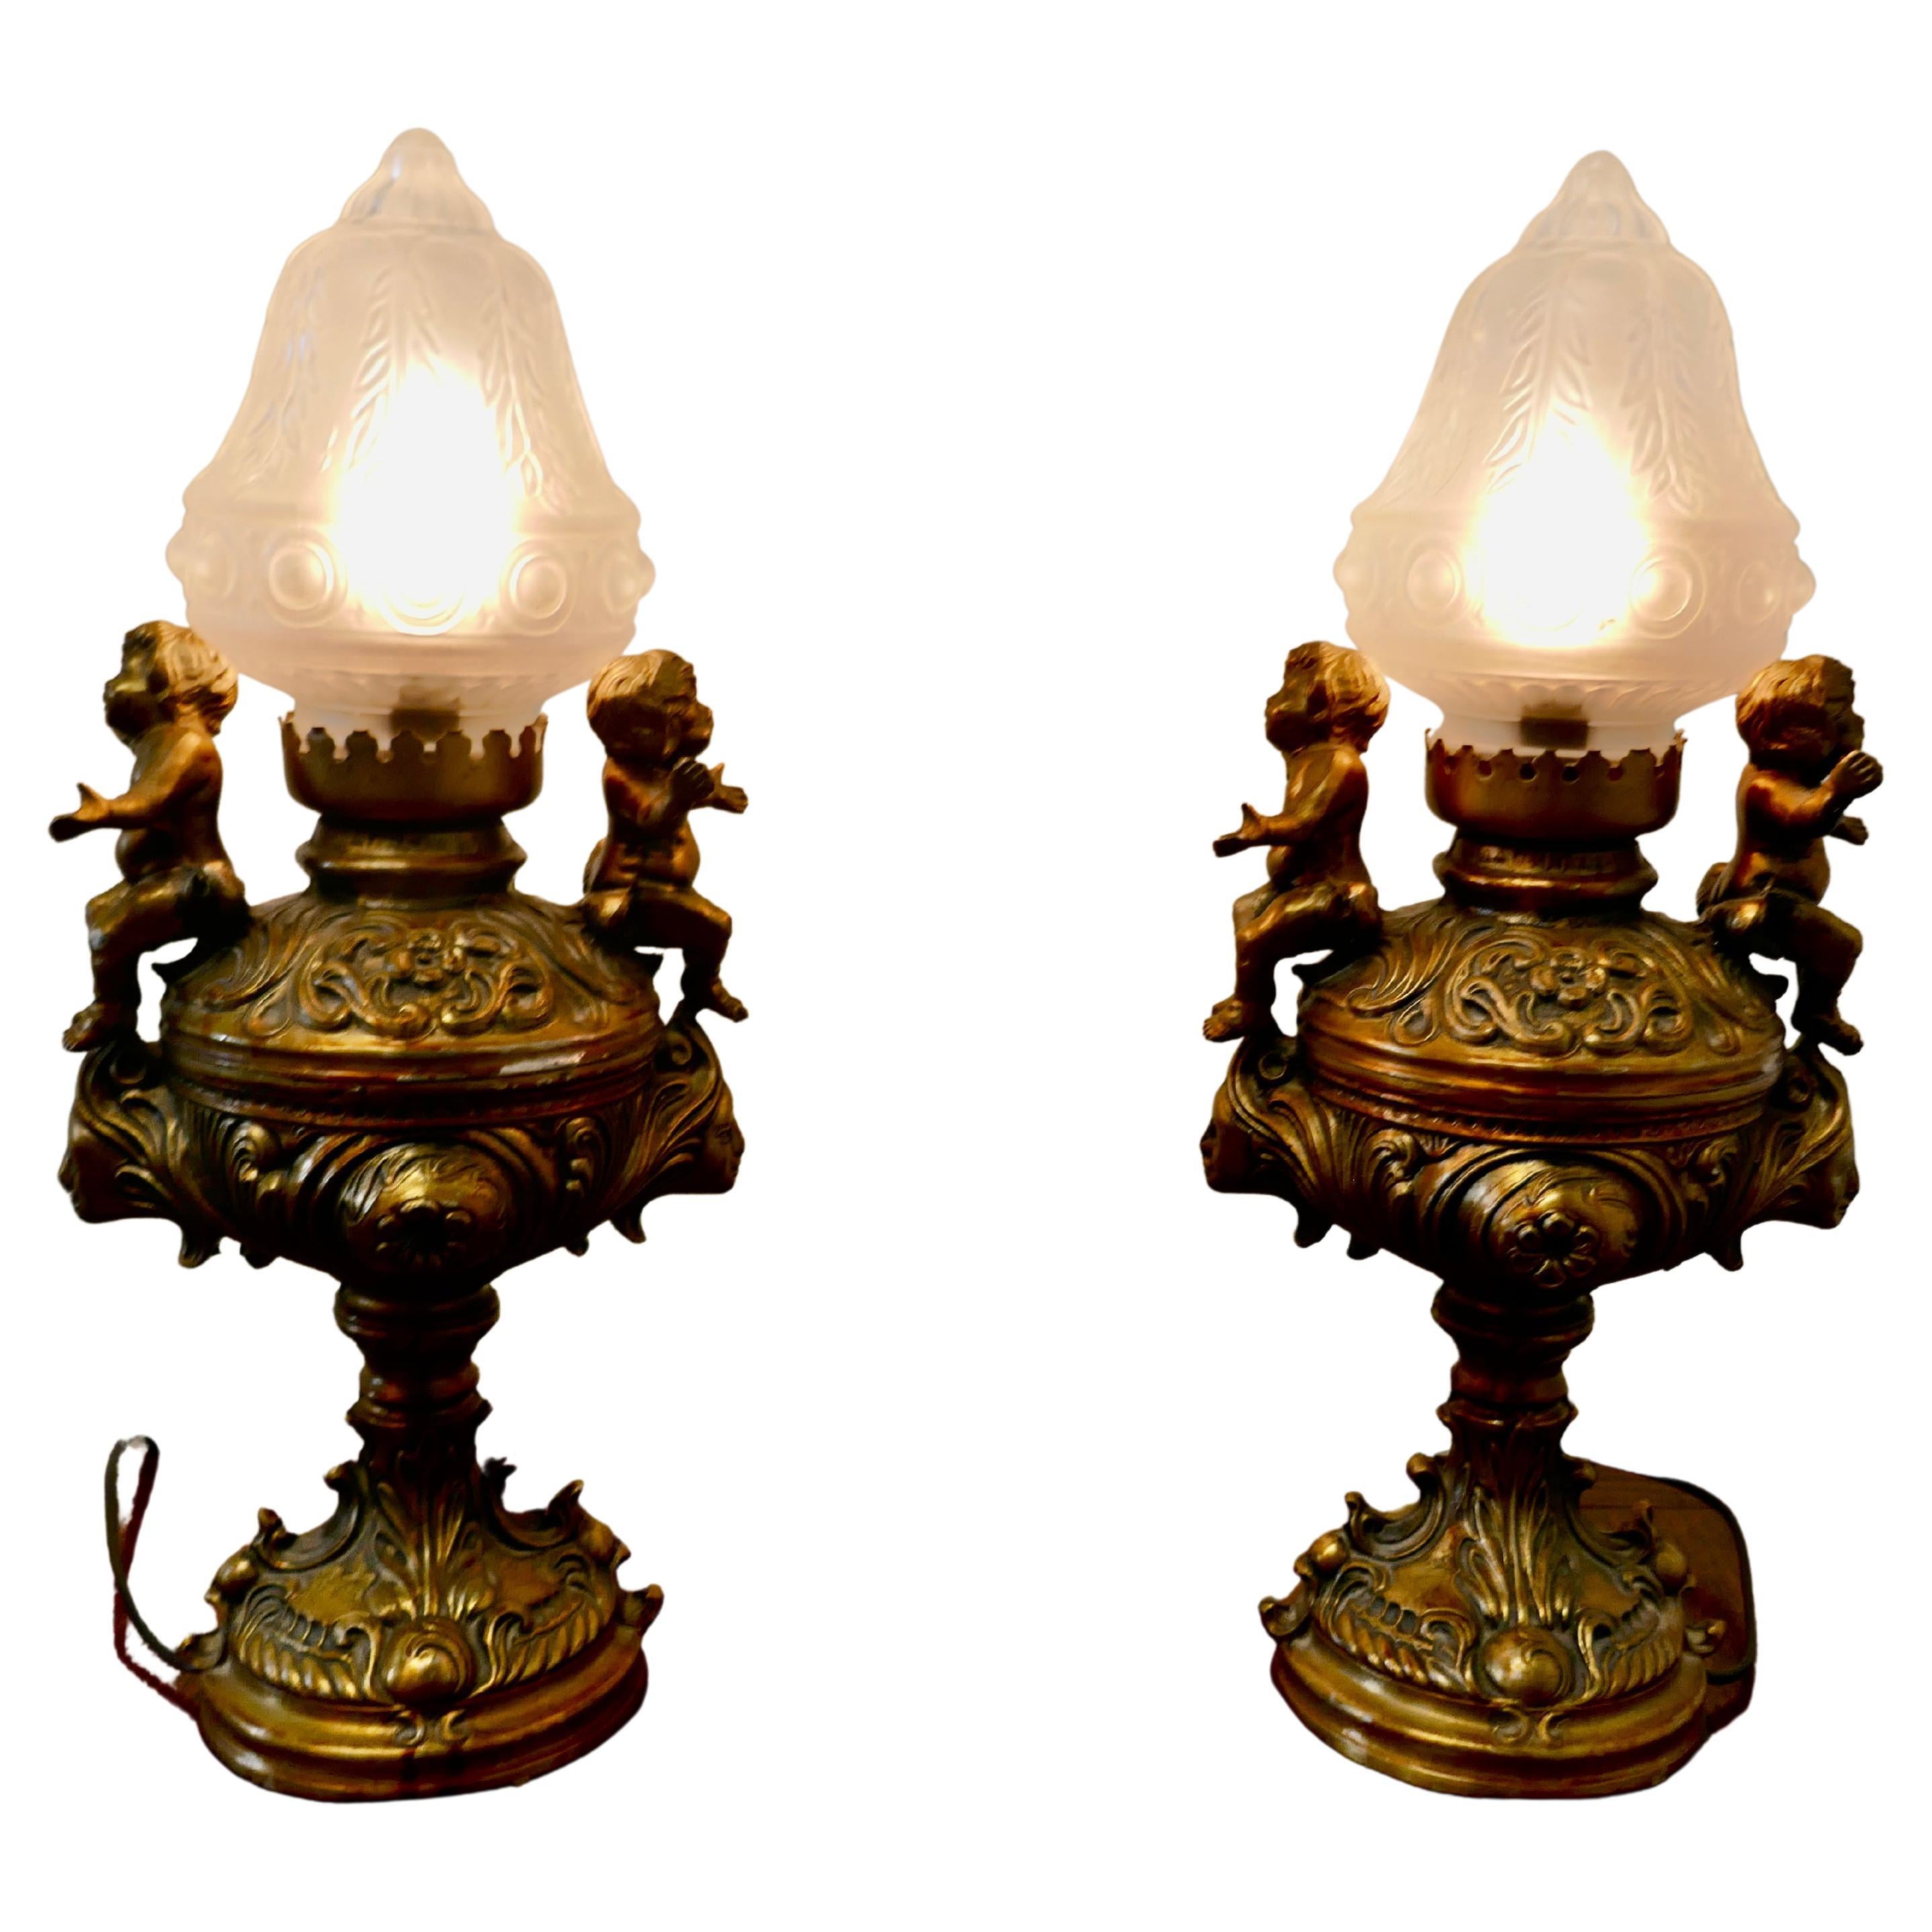 Pair of 19th Century Gilt Lamps in the Form of Cherubs or Putti